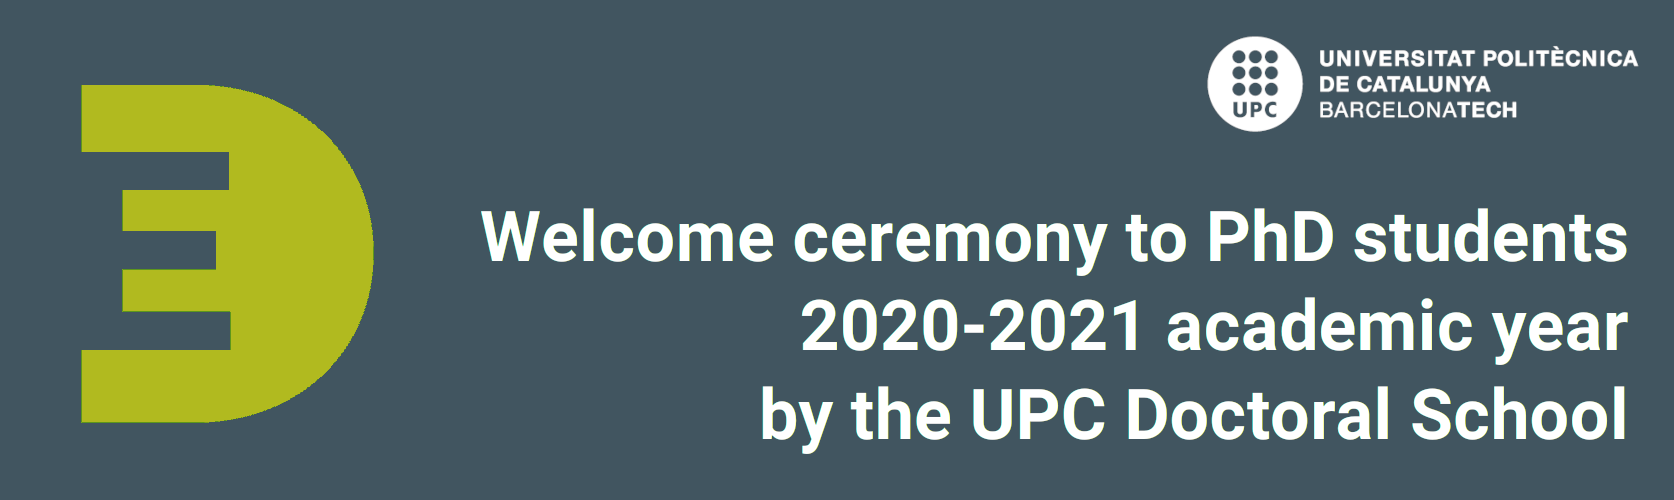 welcome_ceremony8.png